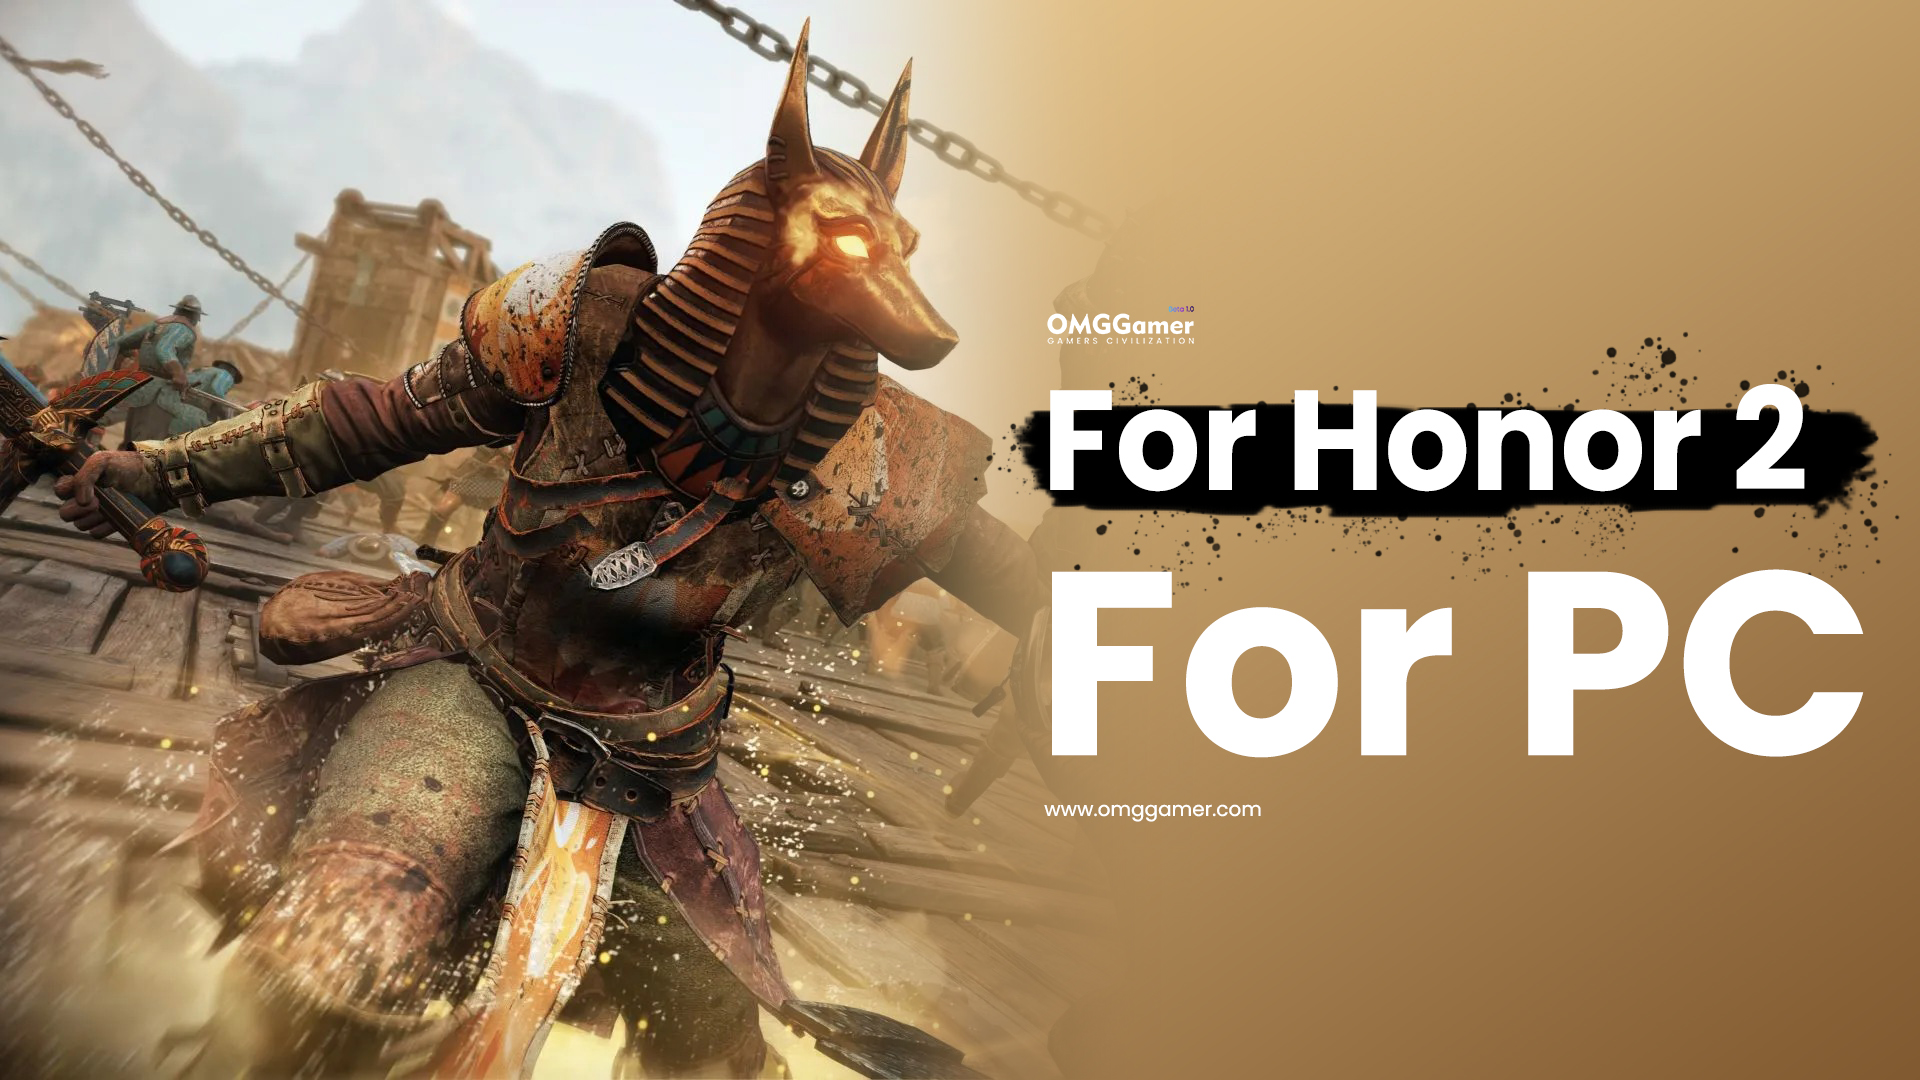 For Honor 2 for PC